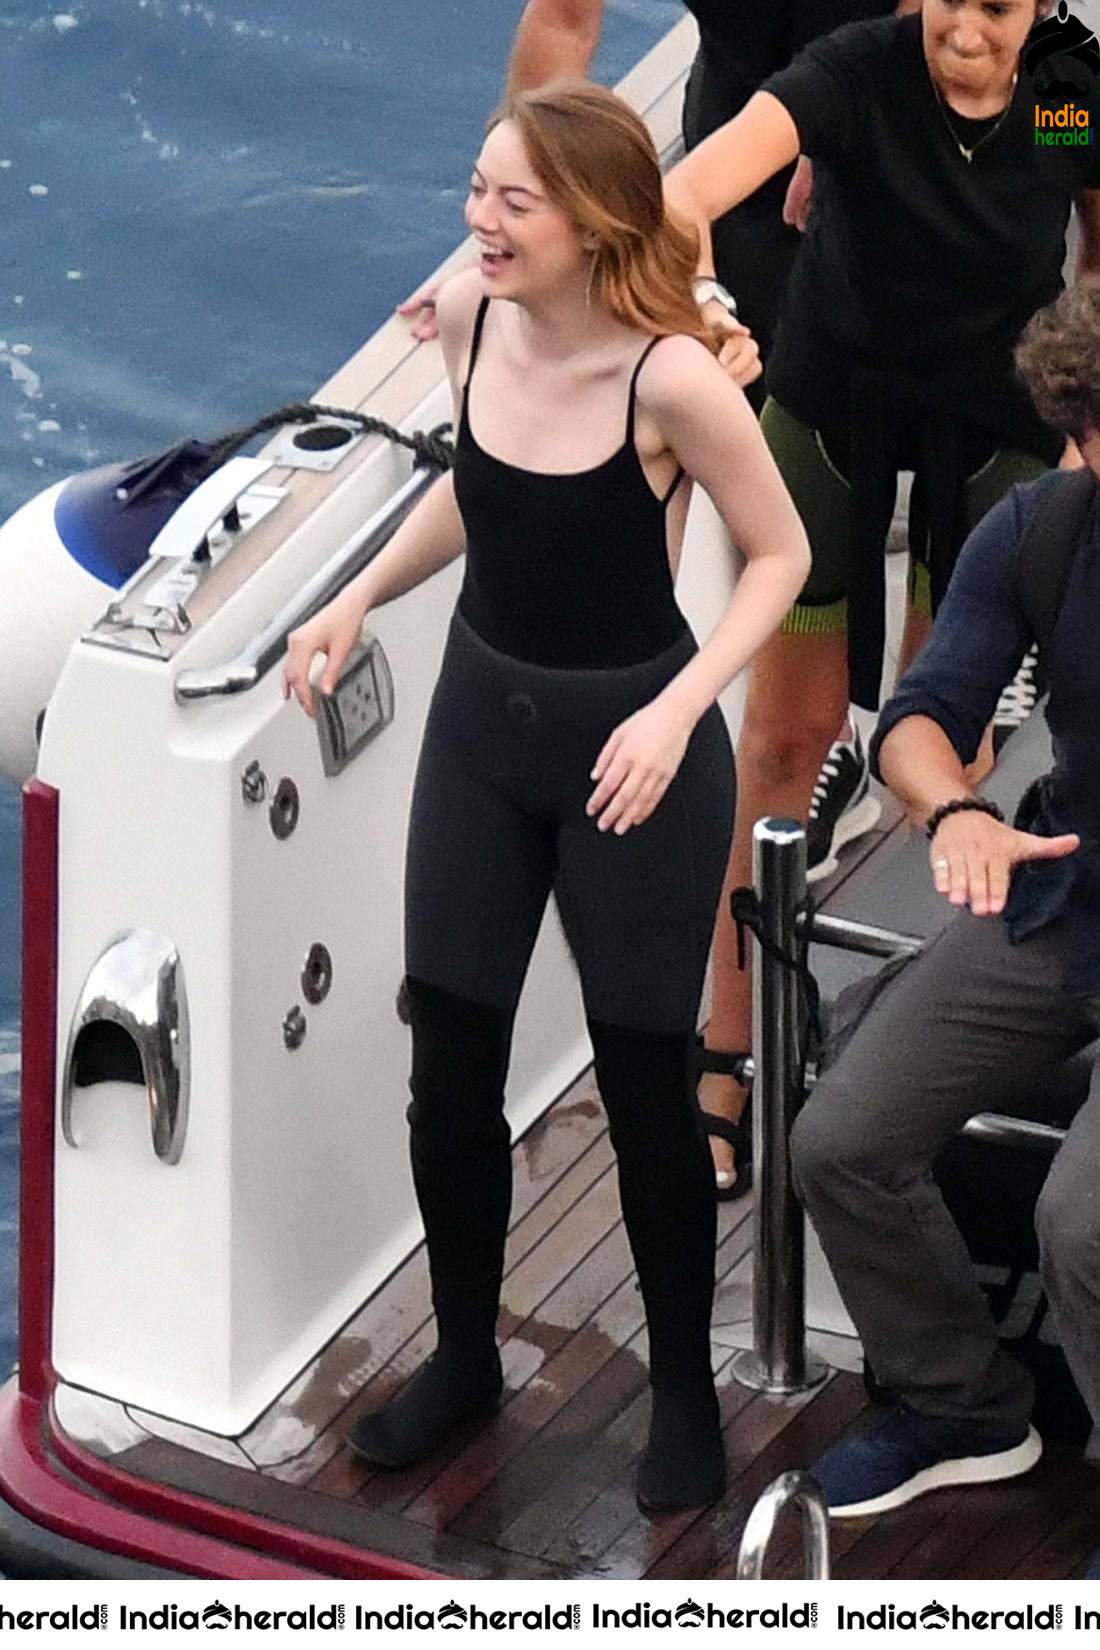 Emma Stone shooting an advertisement for Louis Vuitton in Italy Set 1